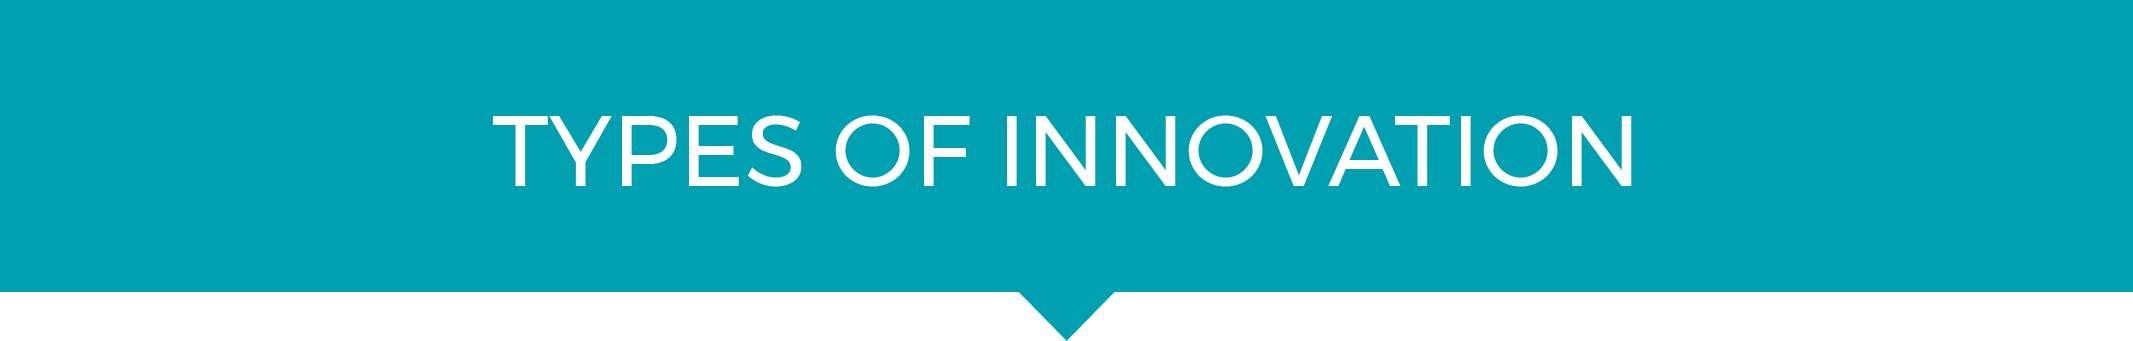 types of innovation within companies text banner